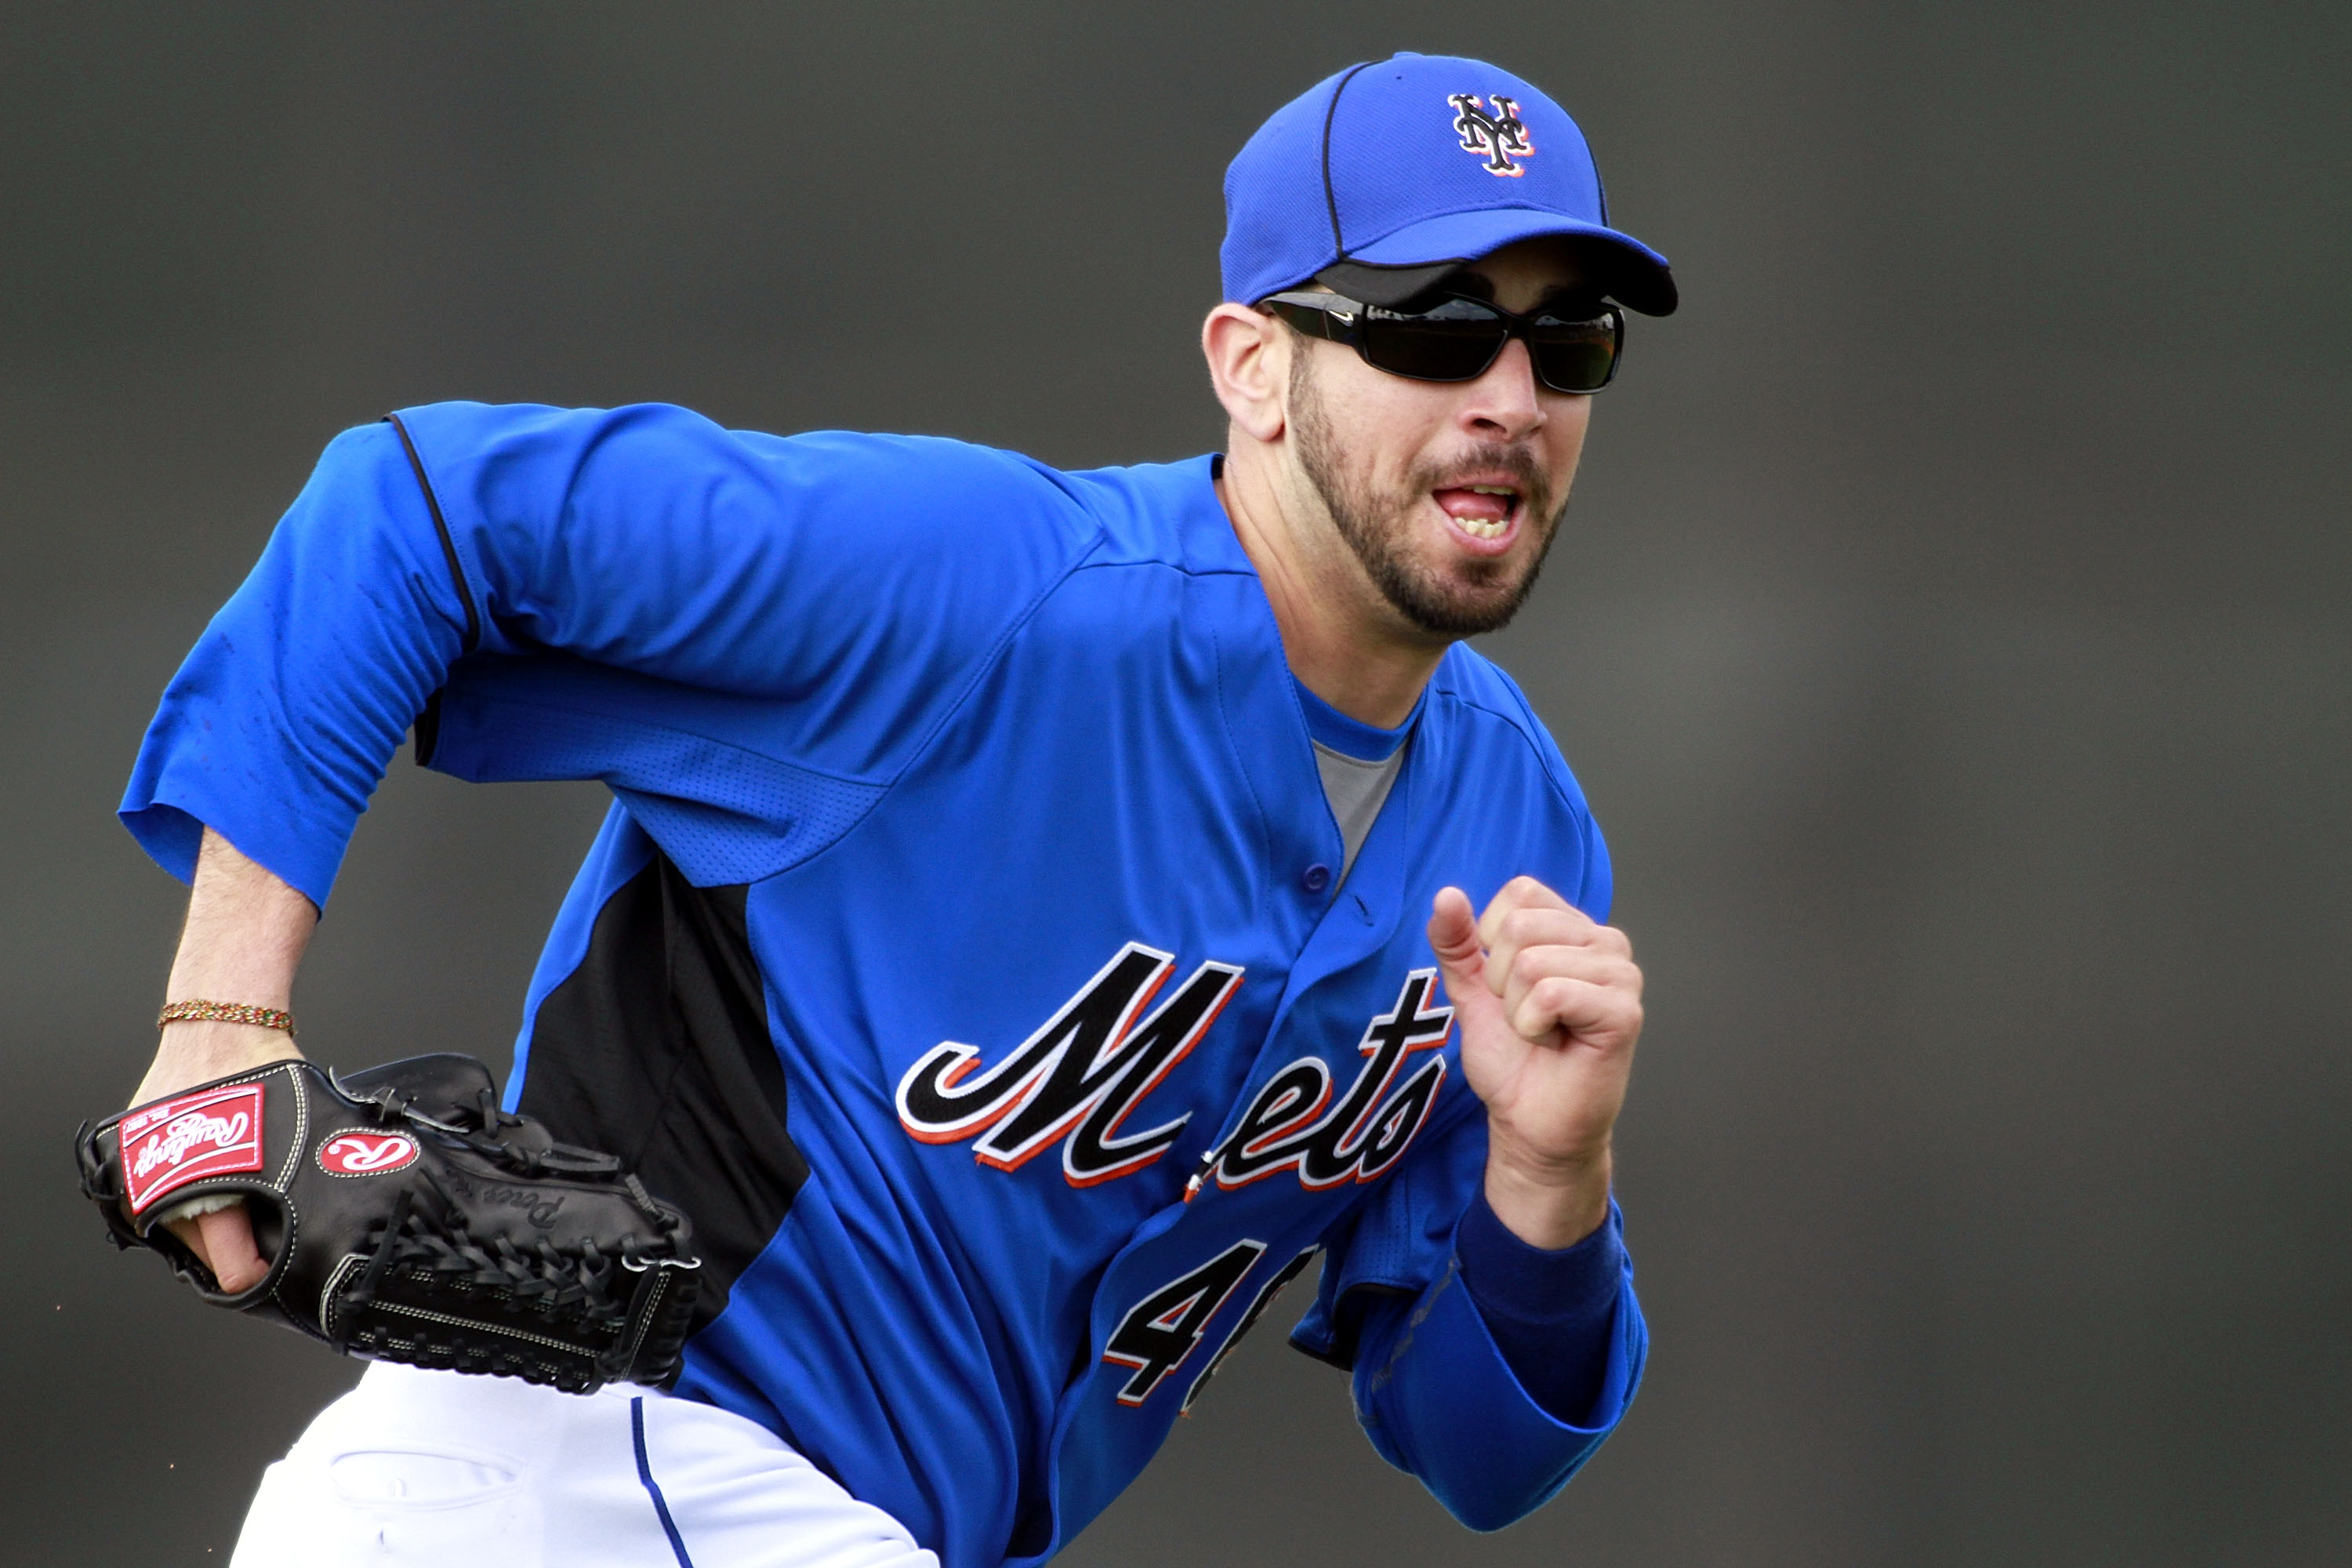 PORT ST. LUCIE, FL - FEBRUARY 17:  Pitcher Oliver Perez #46 of the New York Mets works out during spring training at Tradition Field on February 17, 2011 in Port St. Lucie, Florida.  (Photo by Marc Serota/Getty Images)